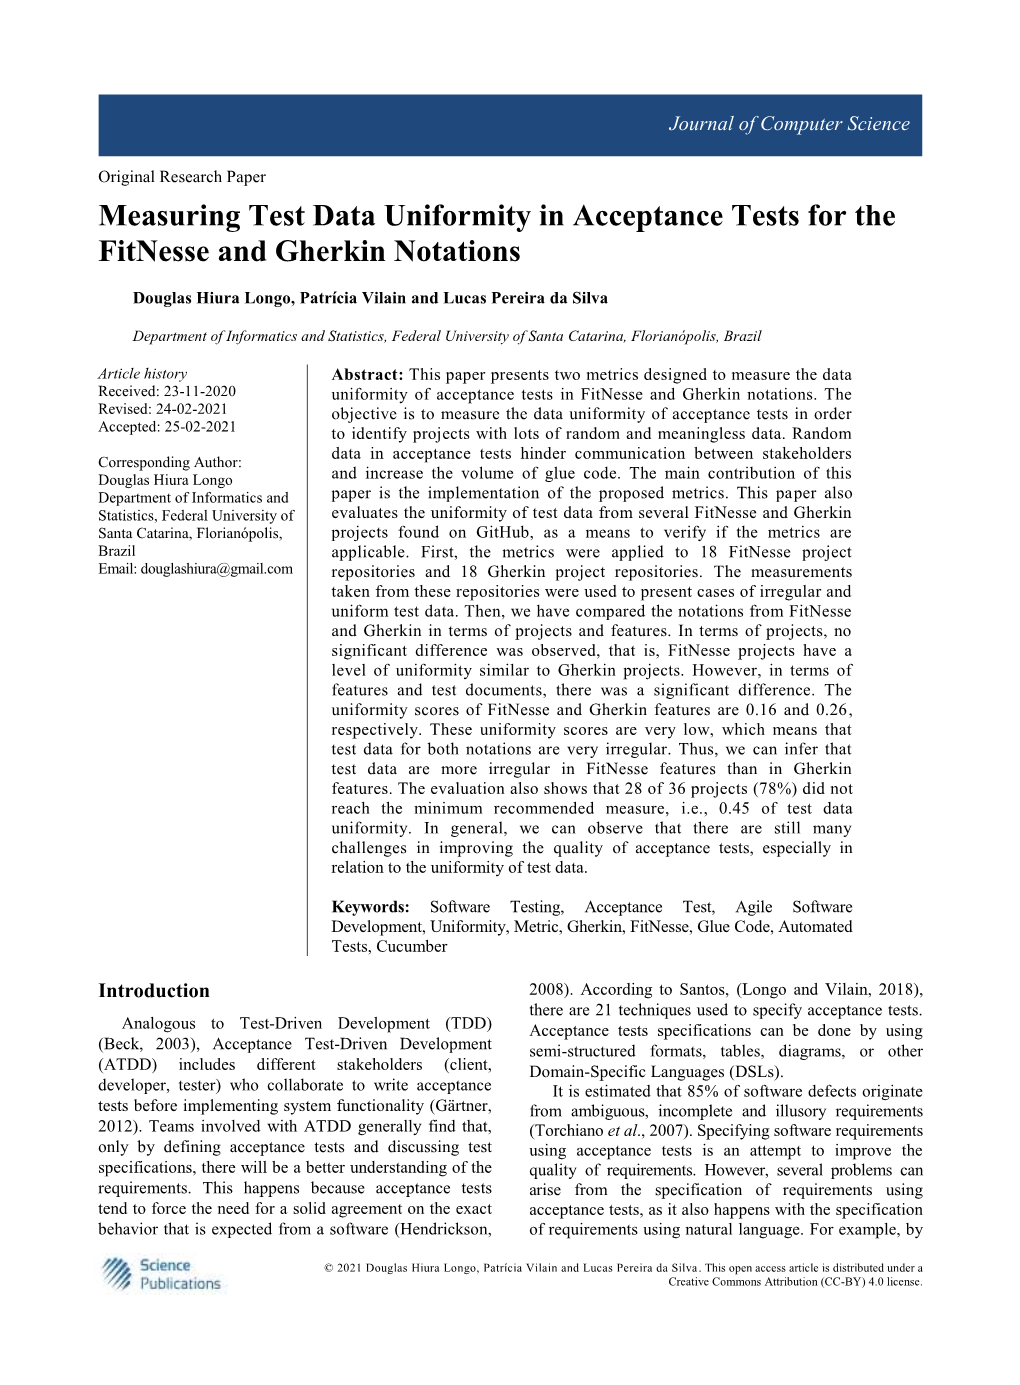 Measuring Test Data Uniformity in Acceptance Tests for the Fitnesse and Gherkin Notations